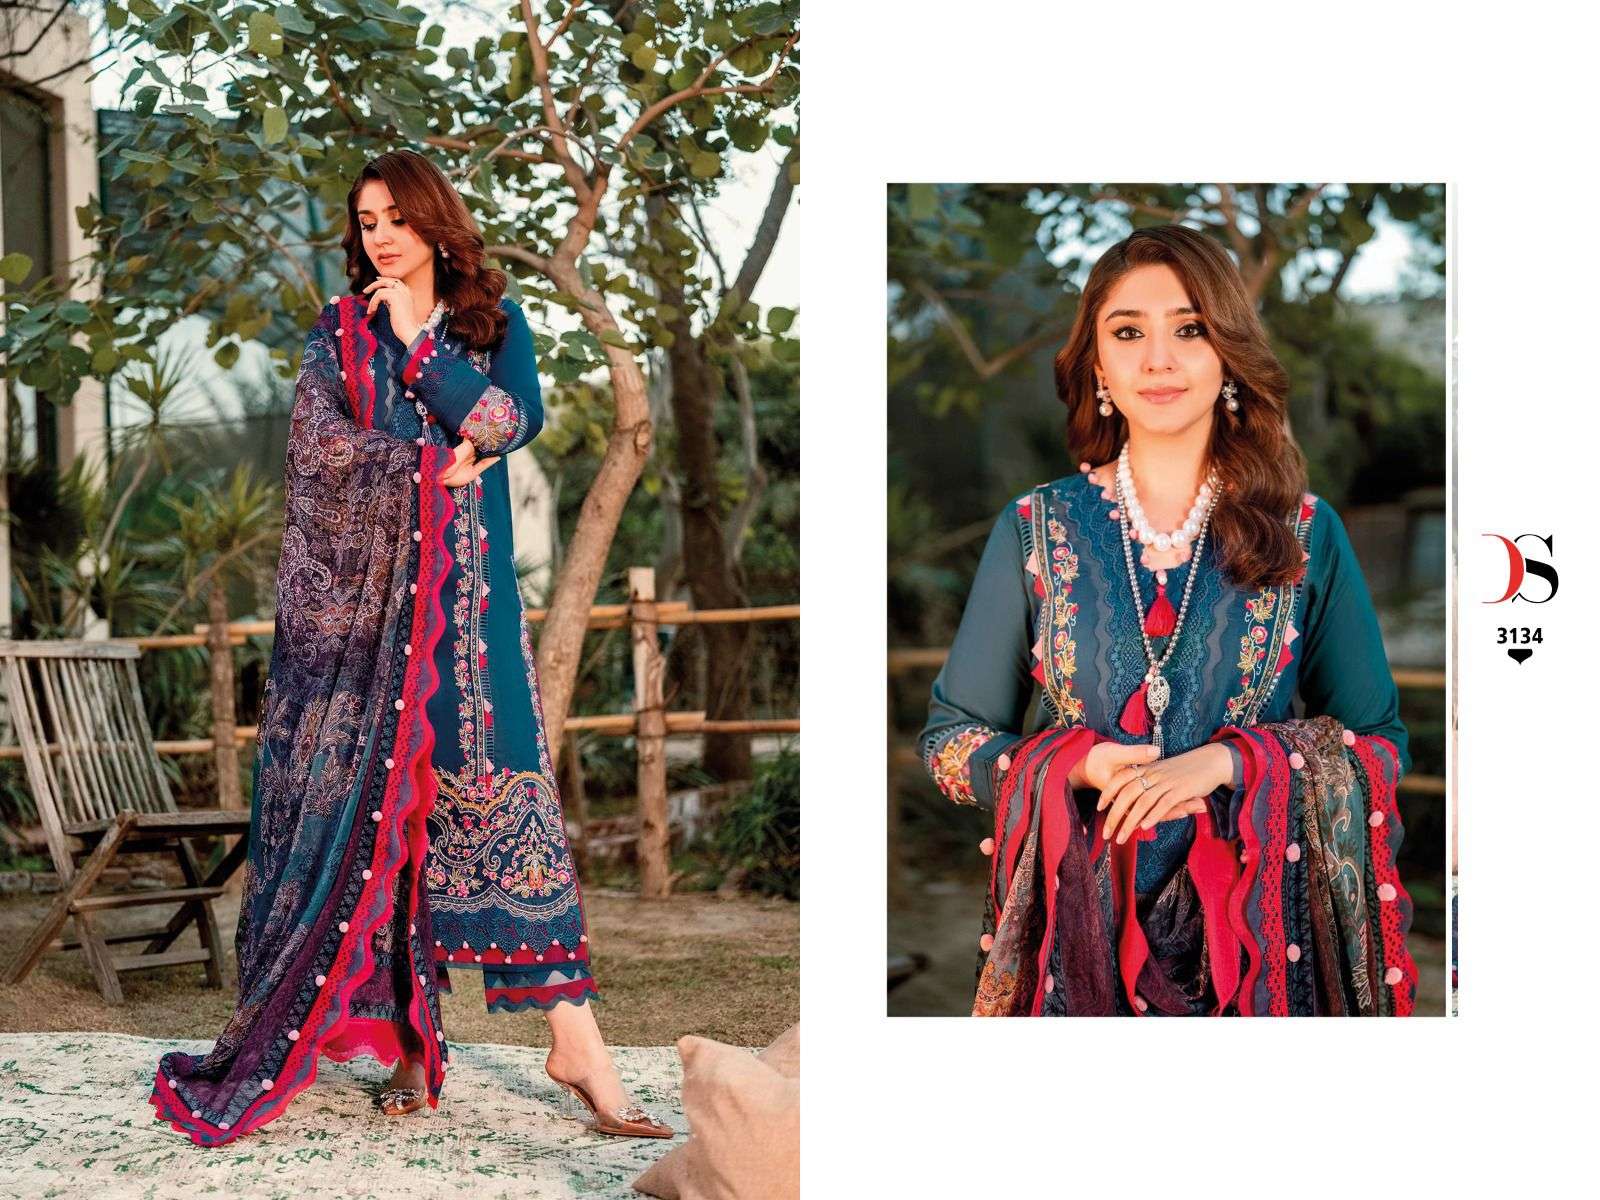 DEEPSY SUITS FIRDOUS OMBRE EMBROIDERED VOL 2 NX 